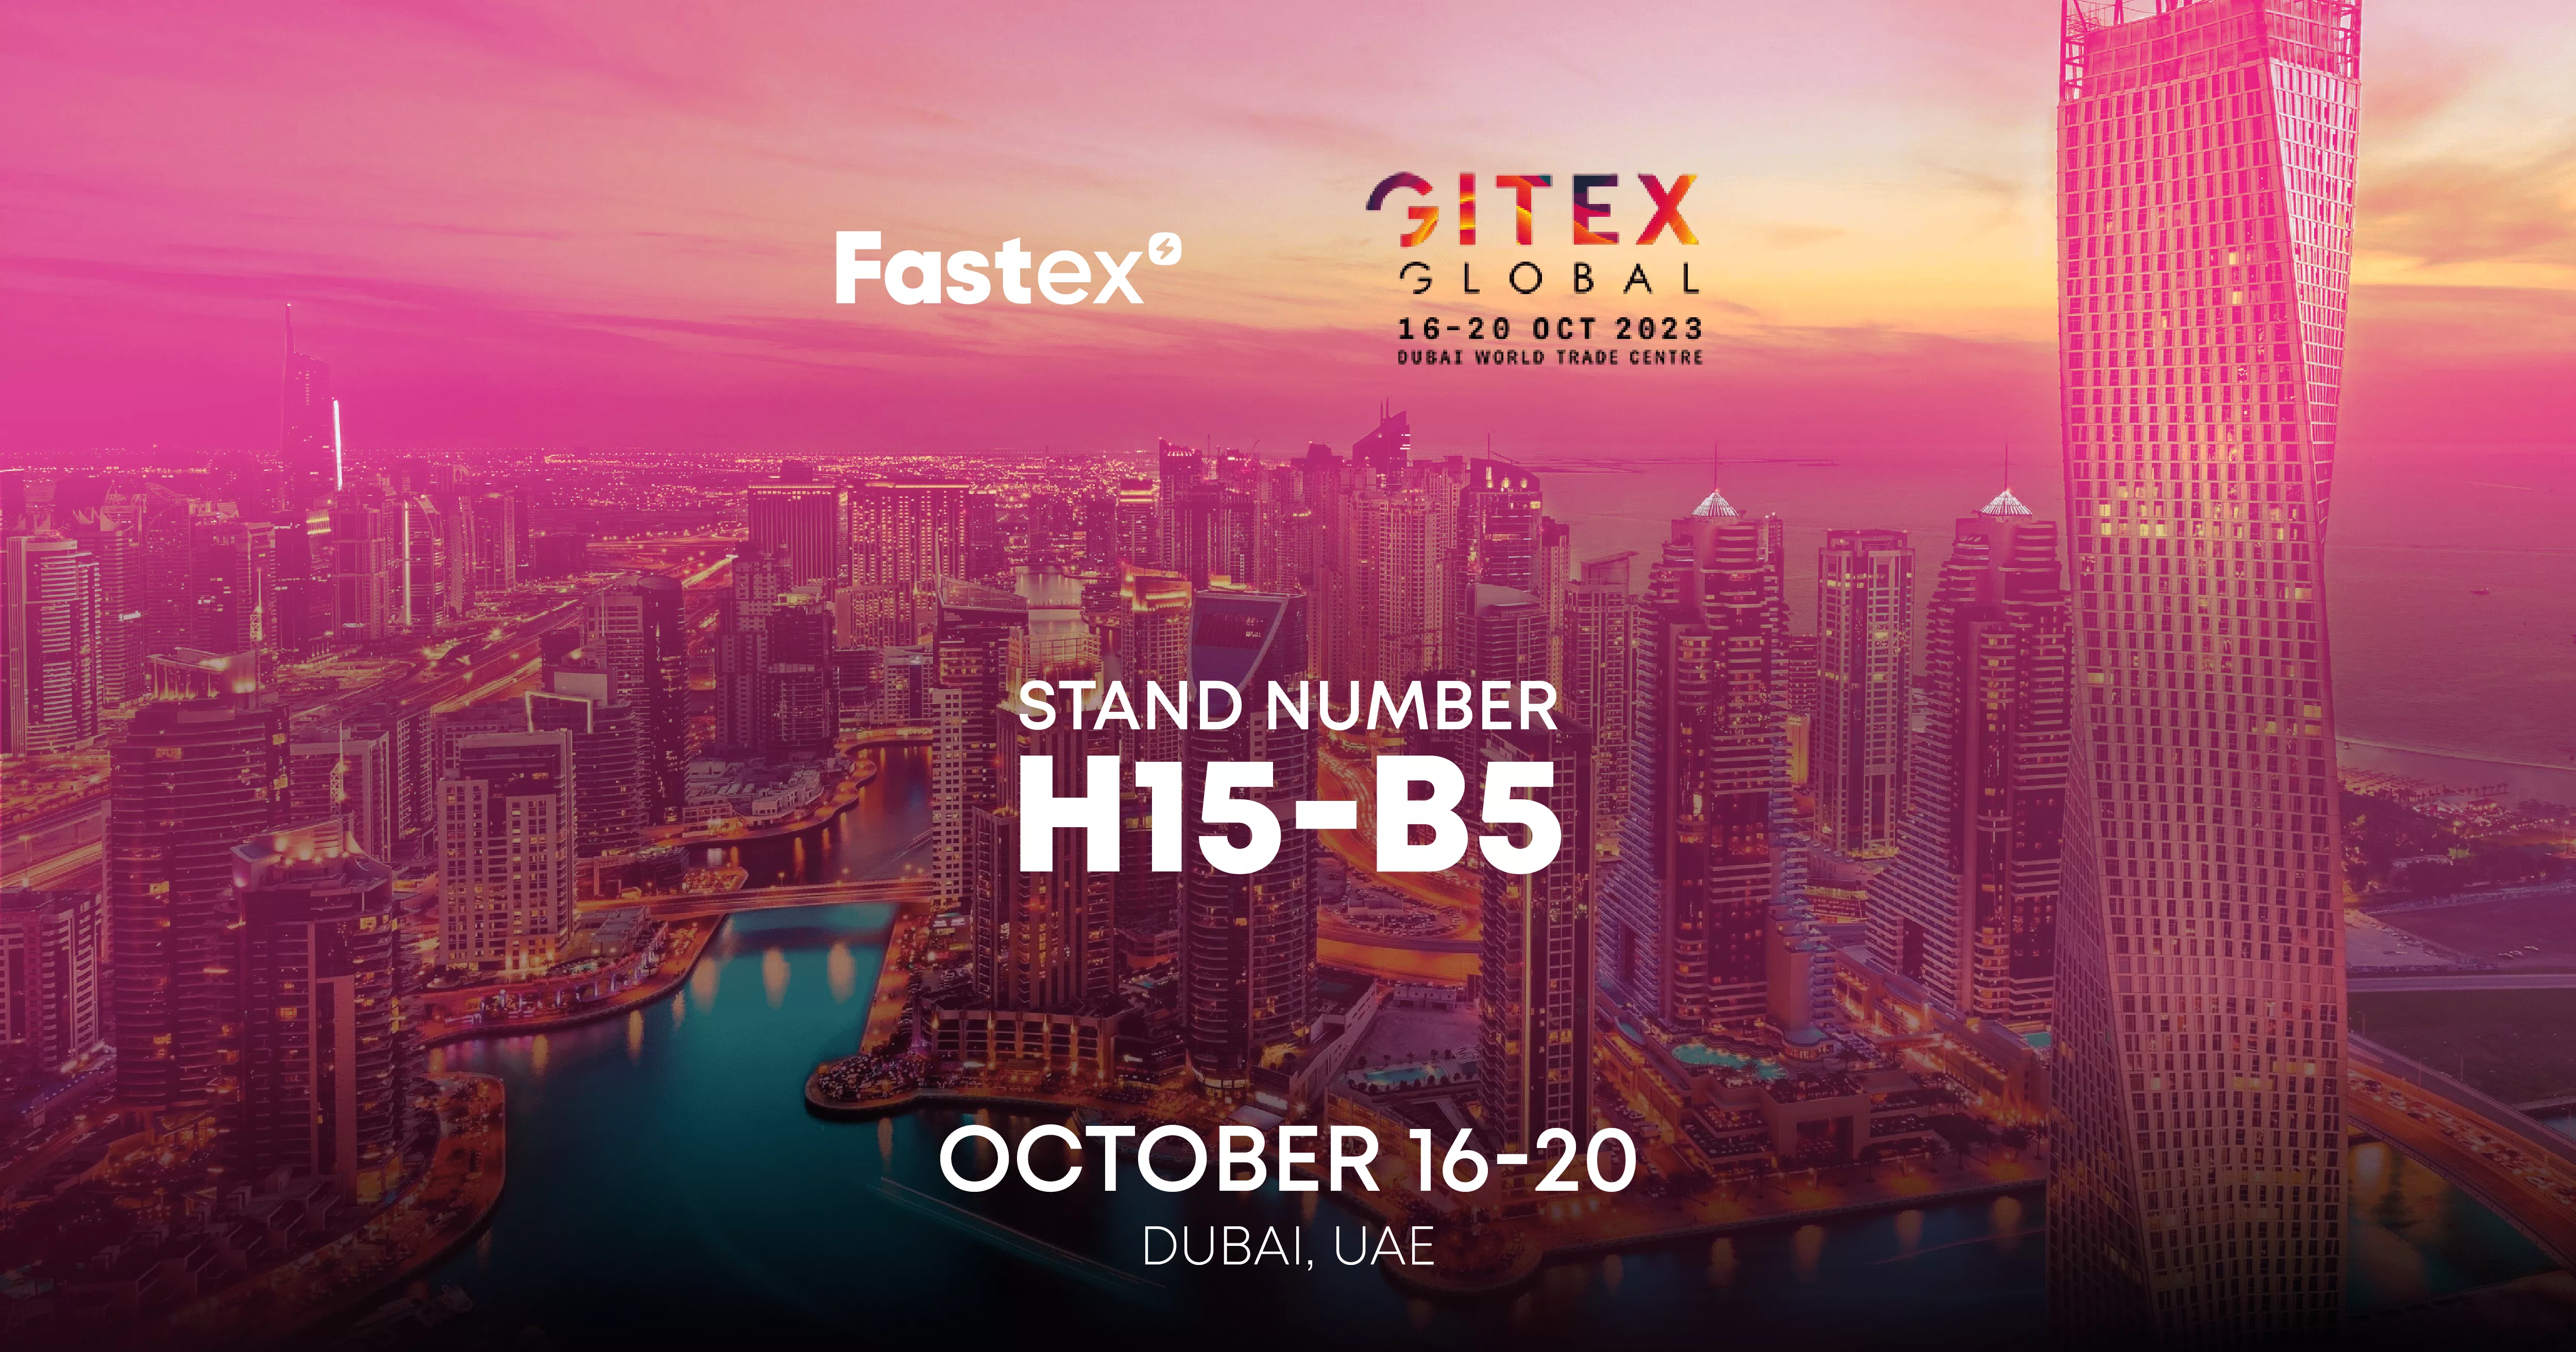 Fastex to Showcase Innovative Projects and Brands at GITEX 2023, Dubai